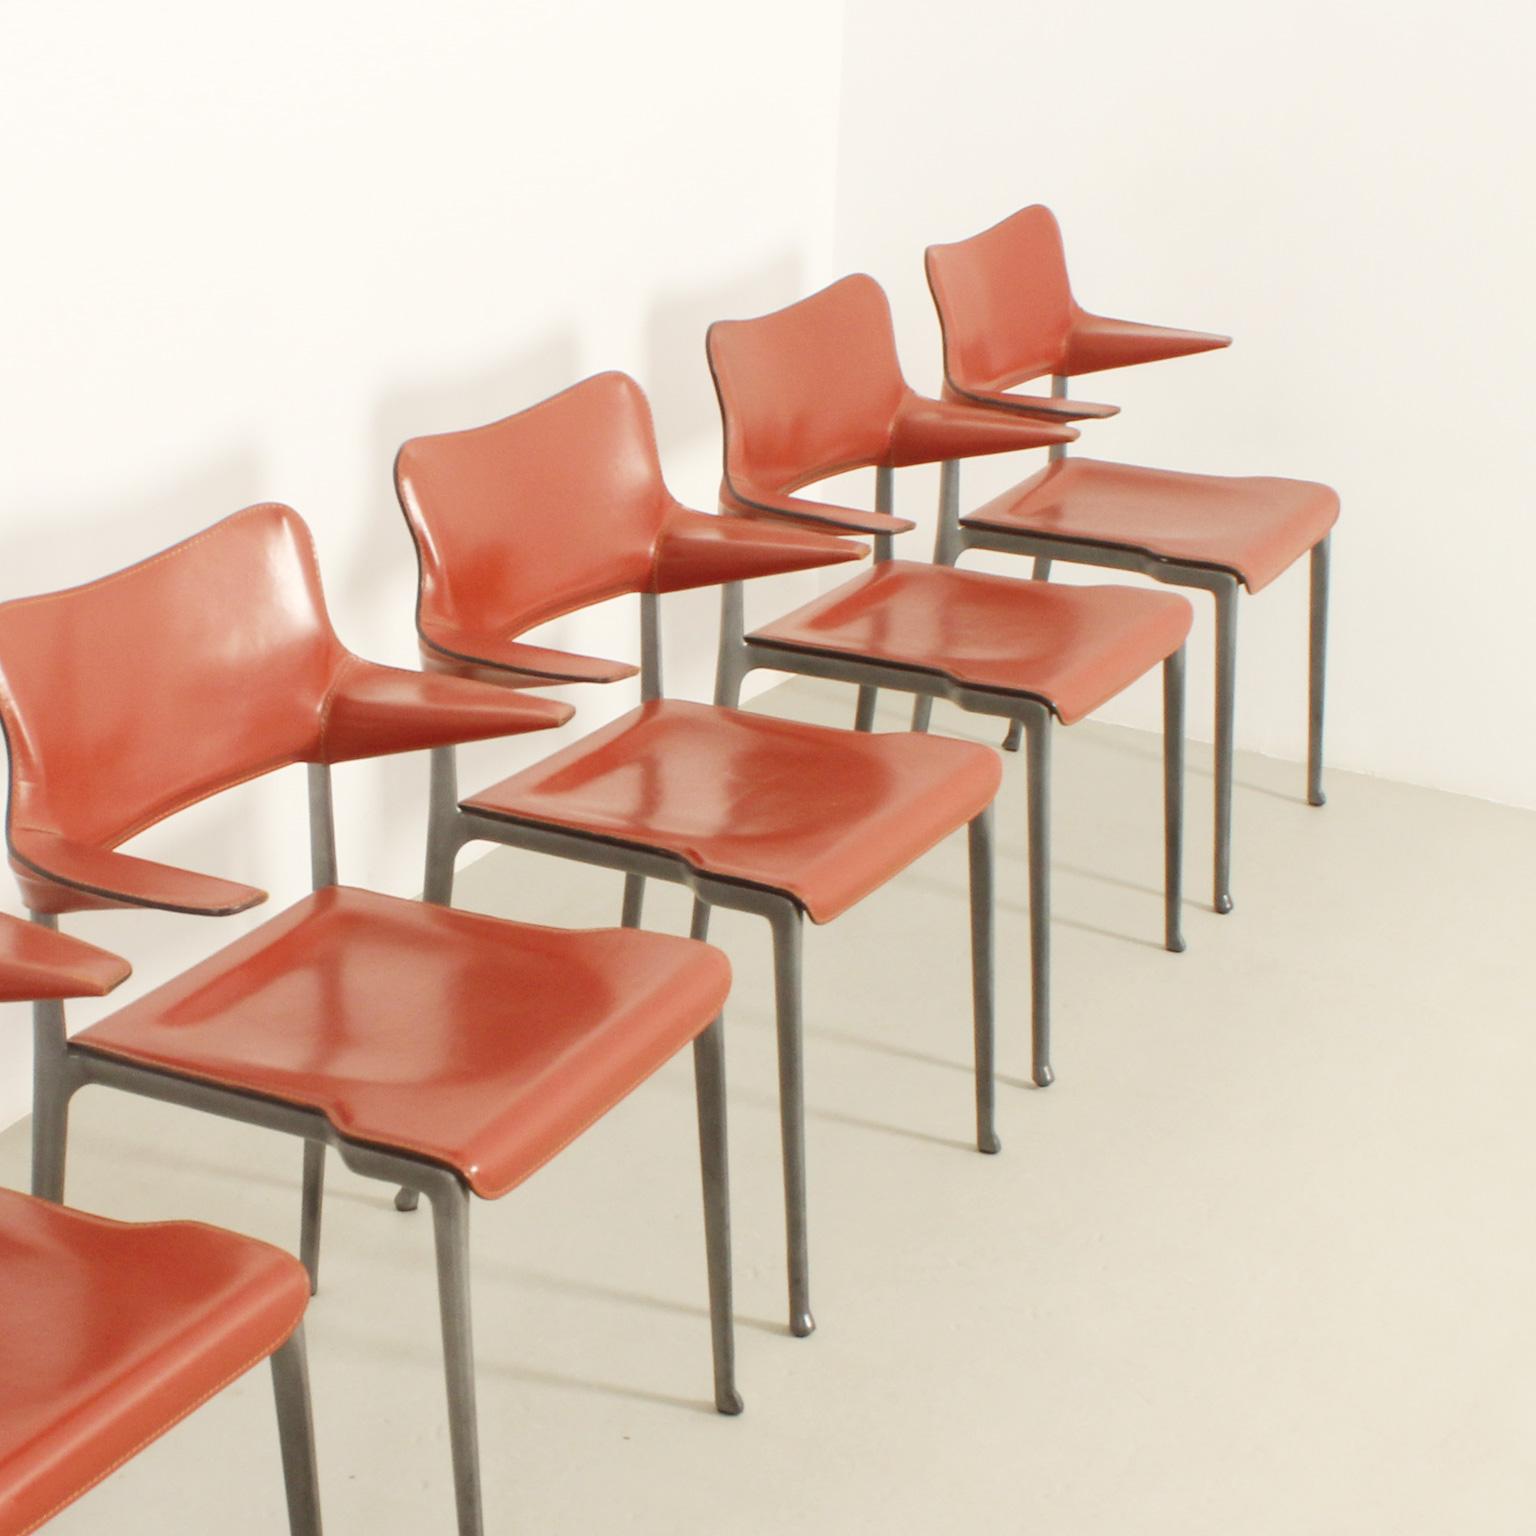 Set of Six Kumo Chairs by Toshiyuki Kita for Casas, Spain, 1989 In Good Condition For Sale In Barcelona, ES